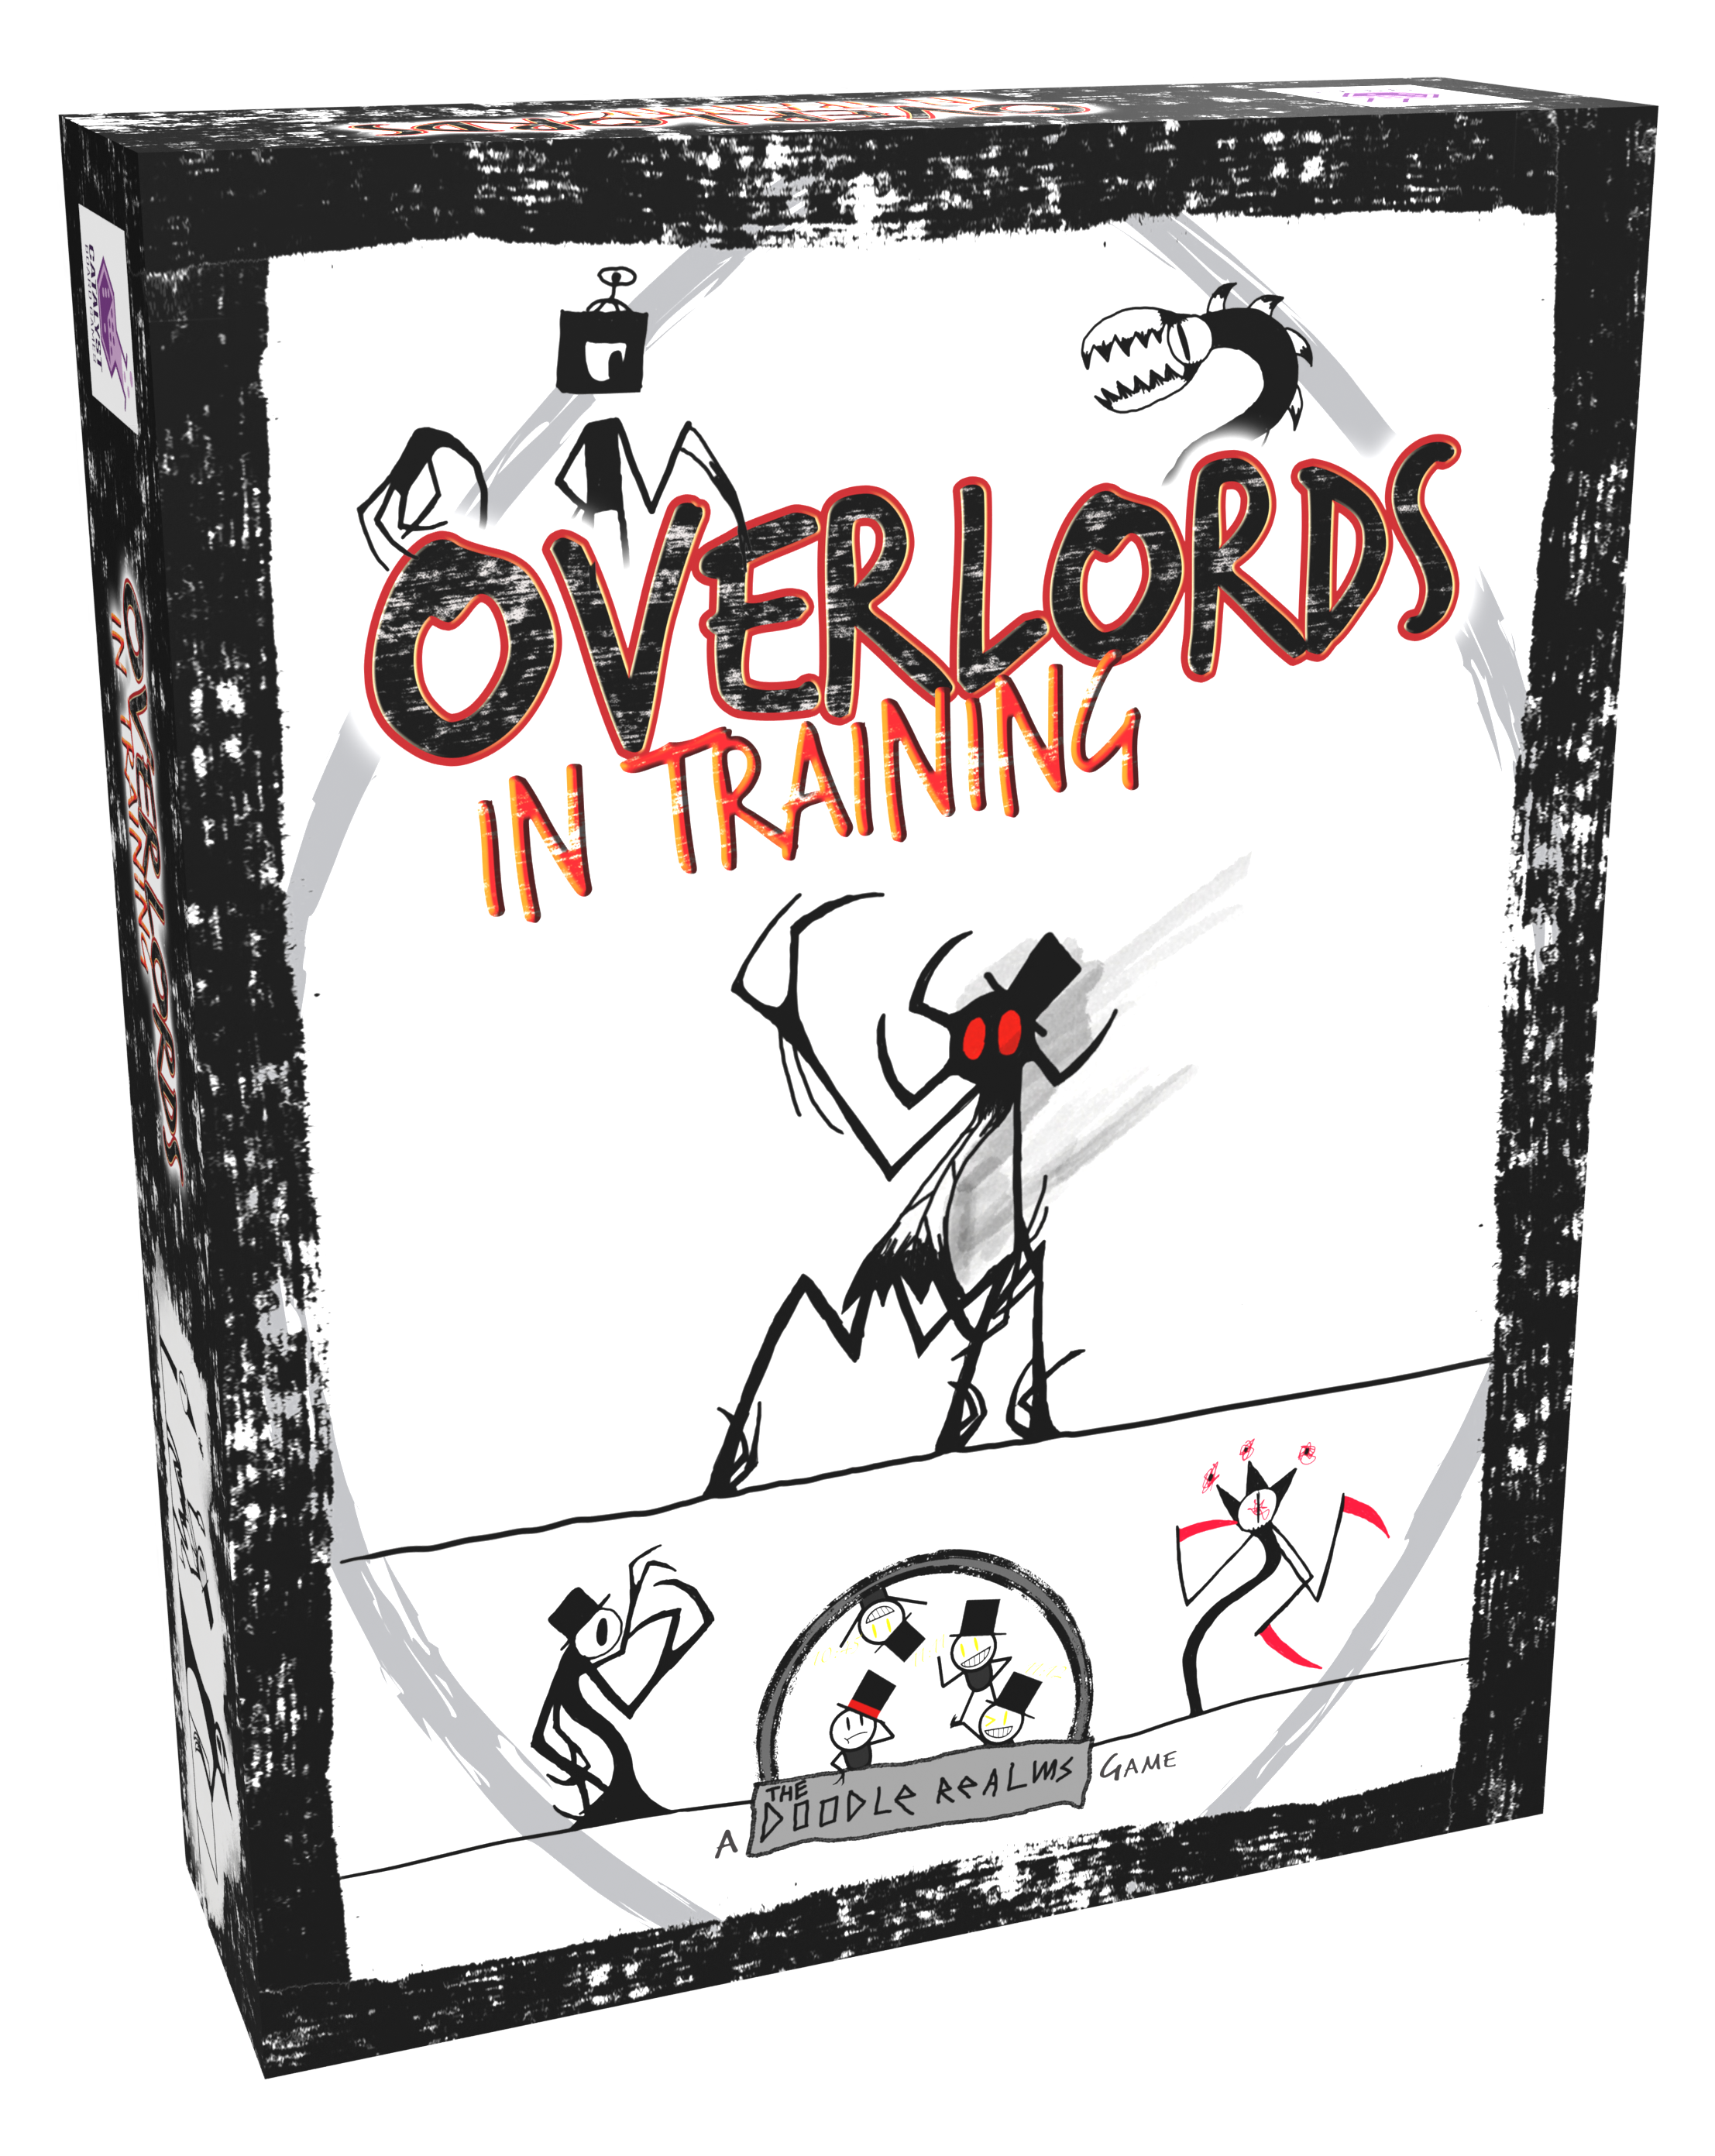 Catalyst BoardGames Launches Kickstarter Campaign for “Overlords: In Training”, A Unique Board Game Born from a Neurodivergent Young Creator’s Vision